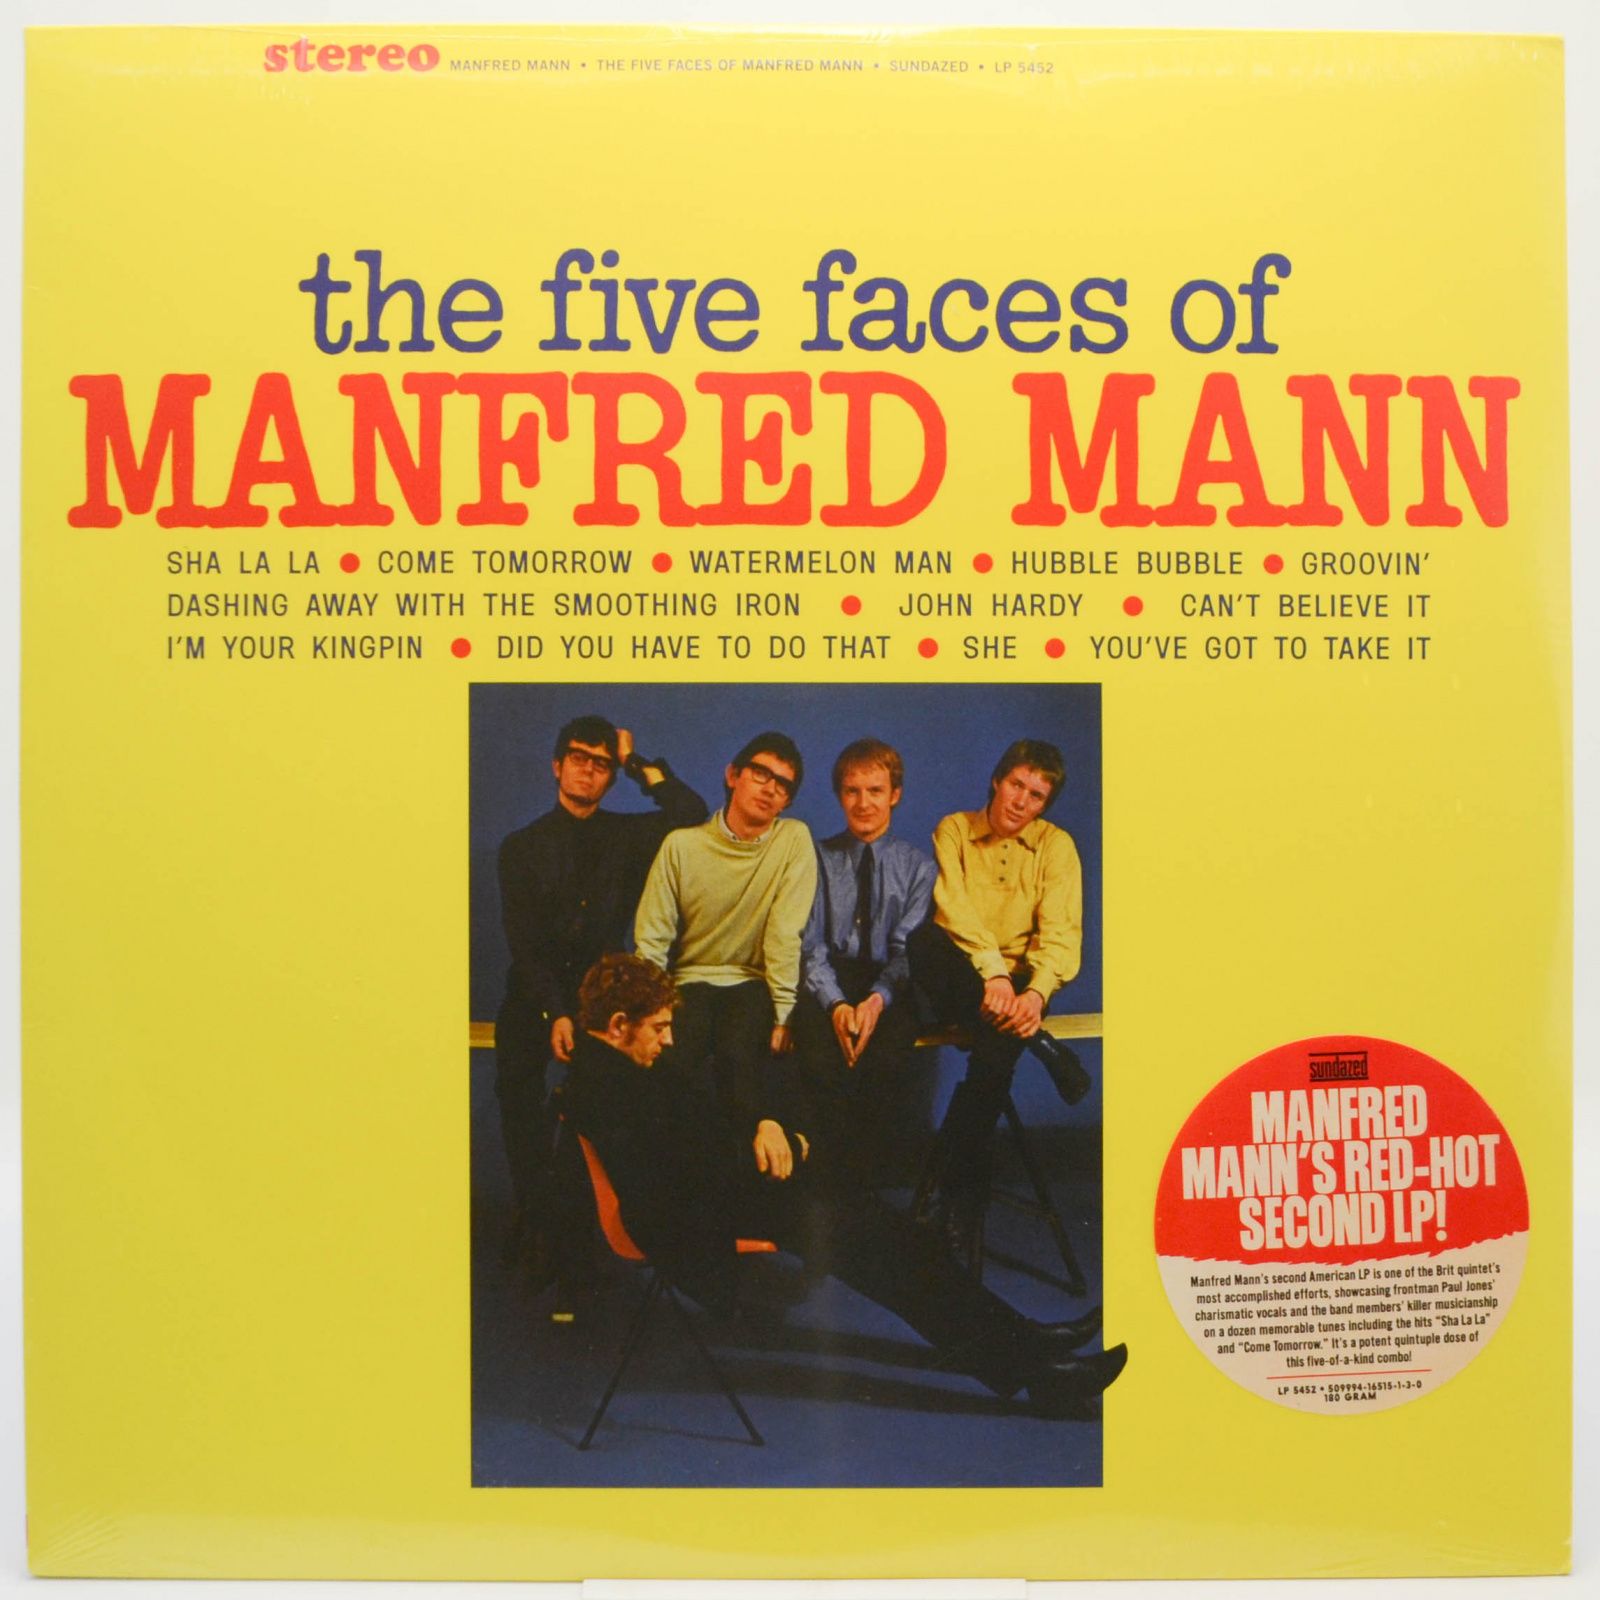 The Five Faces Of Manfred Mann (US), 1965